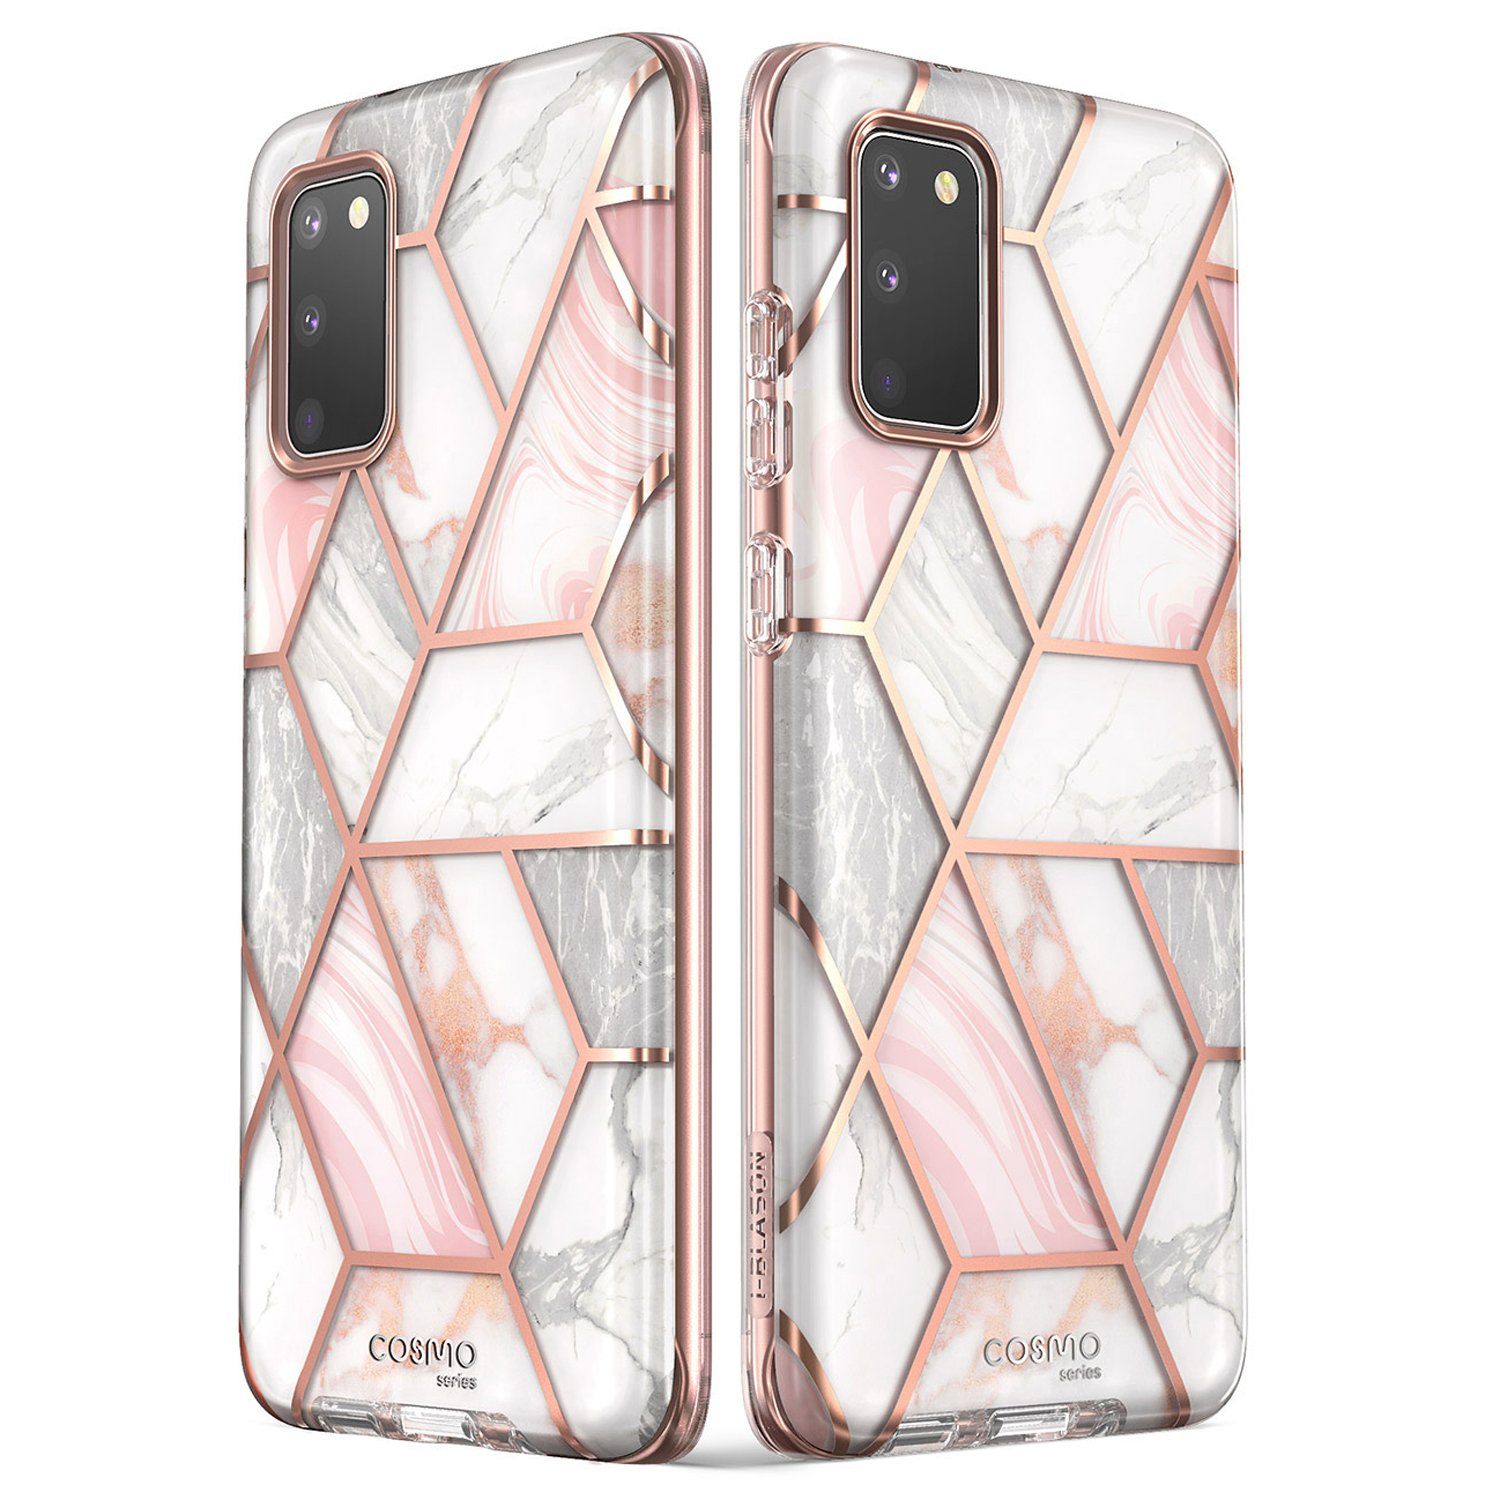 i-Blason Cosmo Series Case for Samsung Galaxy S20 FE (With Build-in Screen Protector), Marble Default i-Blason 